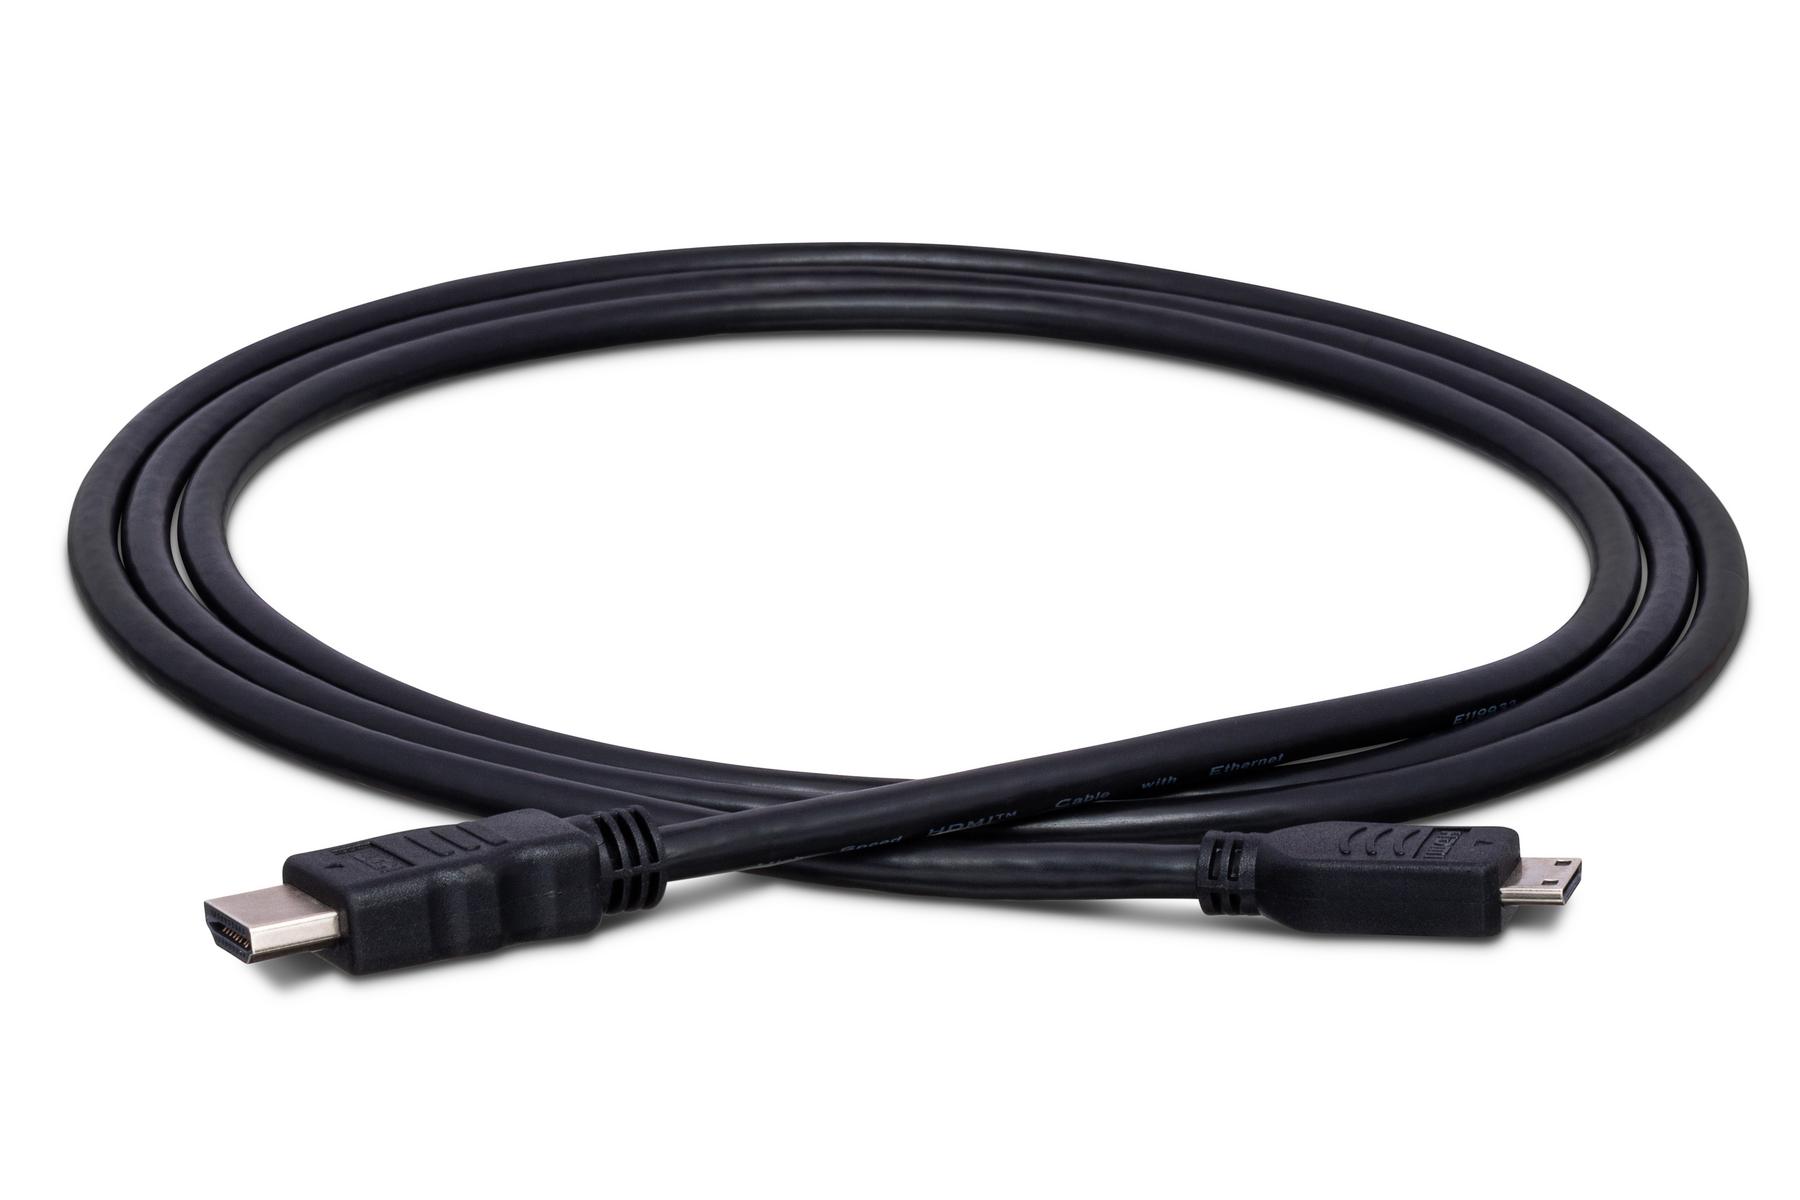 High Speed Cable Mini HDMI to HDMI Male / Male 5 m Black - HDMI Cables -  Multimedia Cables - Cables and Sockets